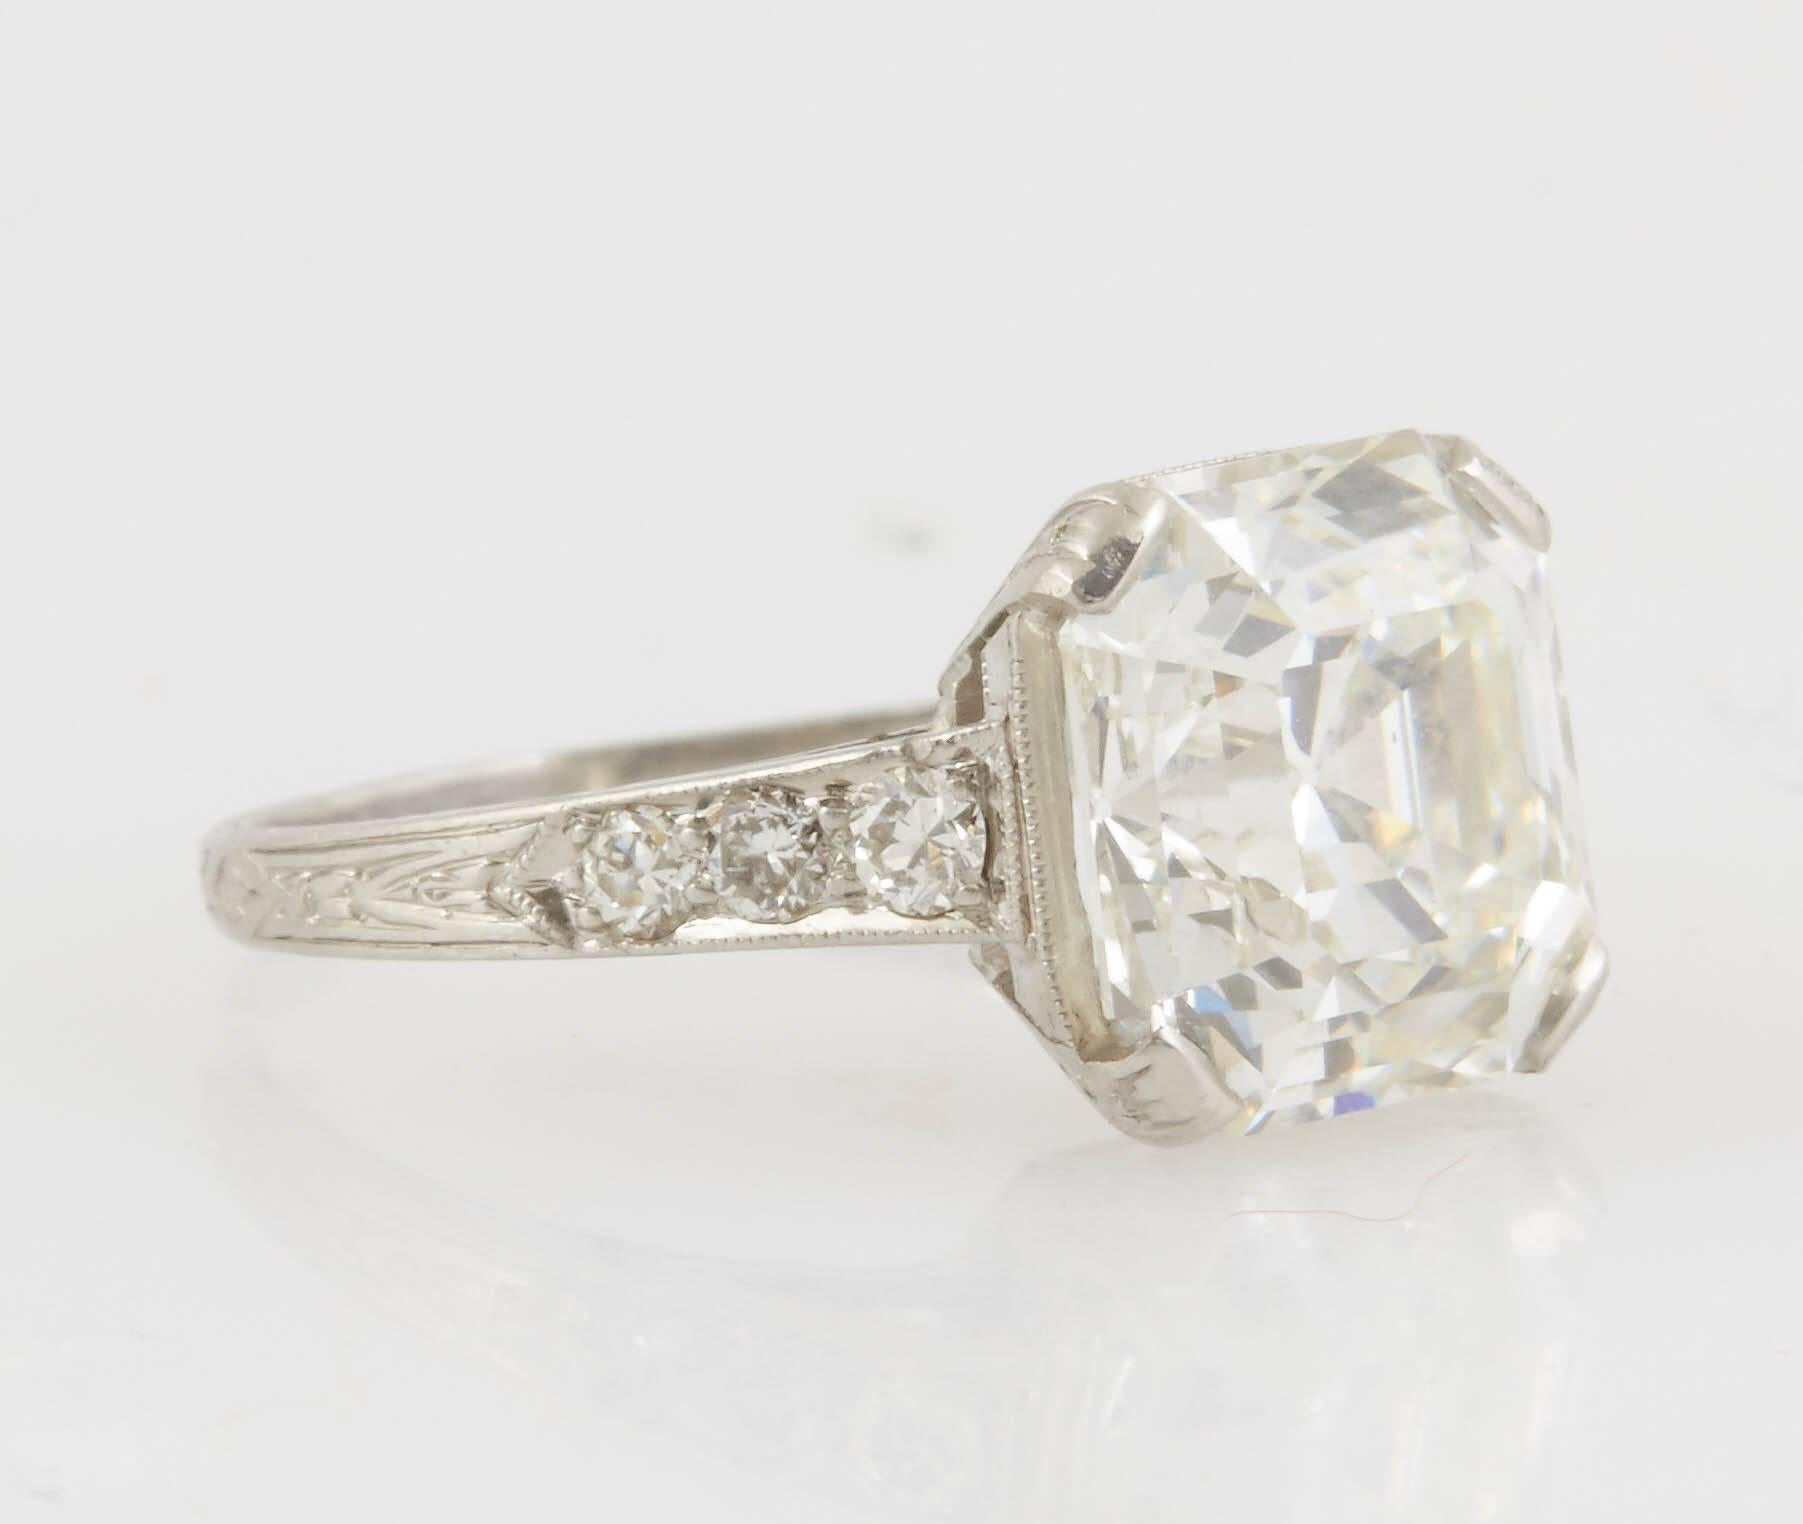 Antique Engagement ring, finely crafted in platinum with GIA certified Asscher cut diamond at the center, weighing 3.97 carat, J Color VS1 Clarity.